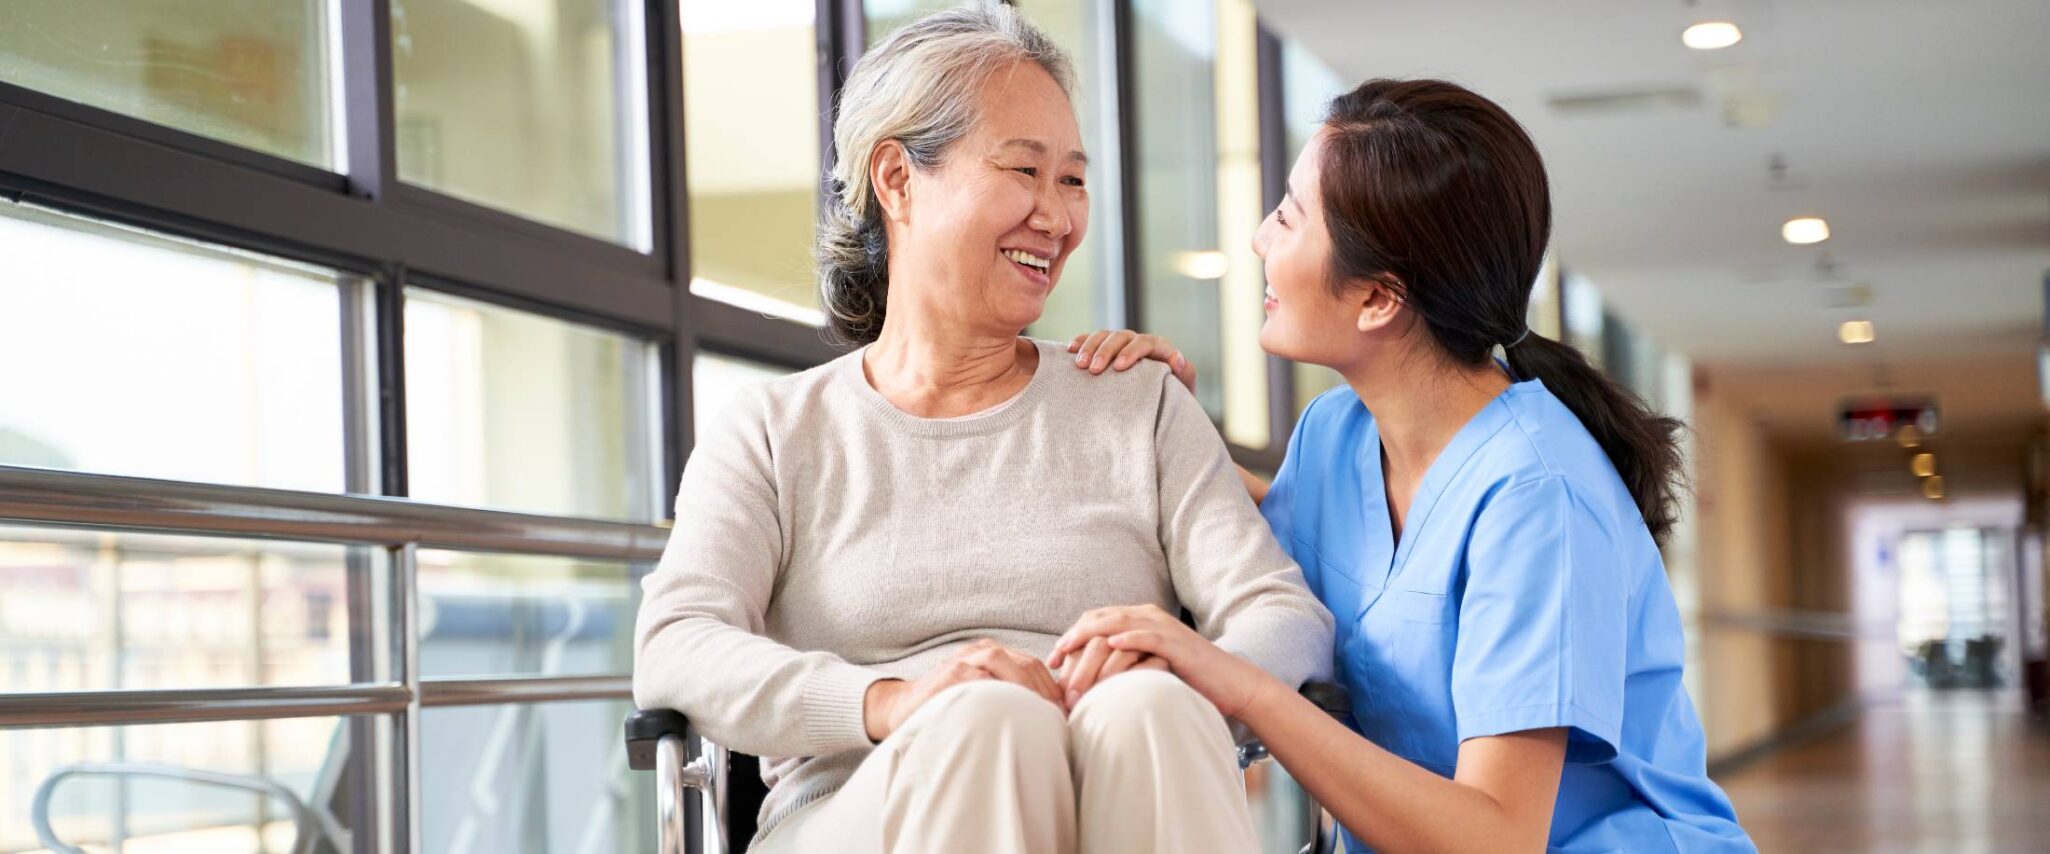 senior lady in a wheelchair talking with a health care worker